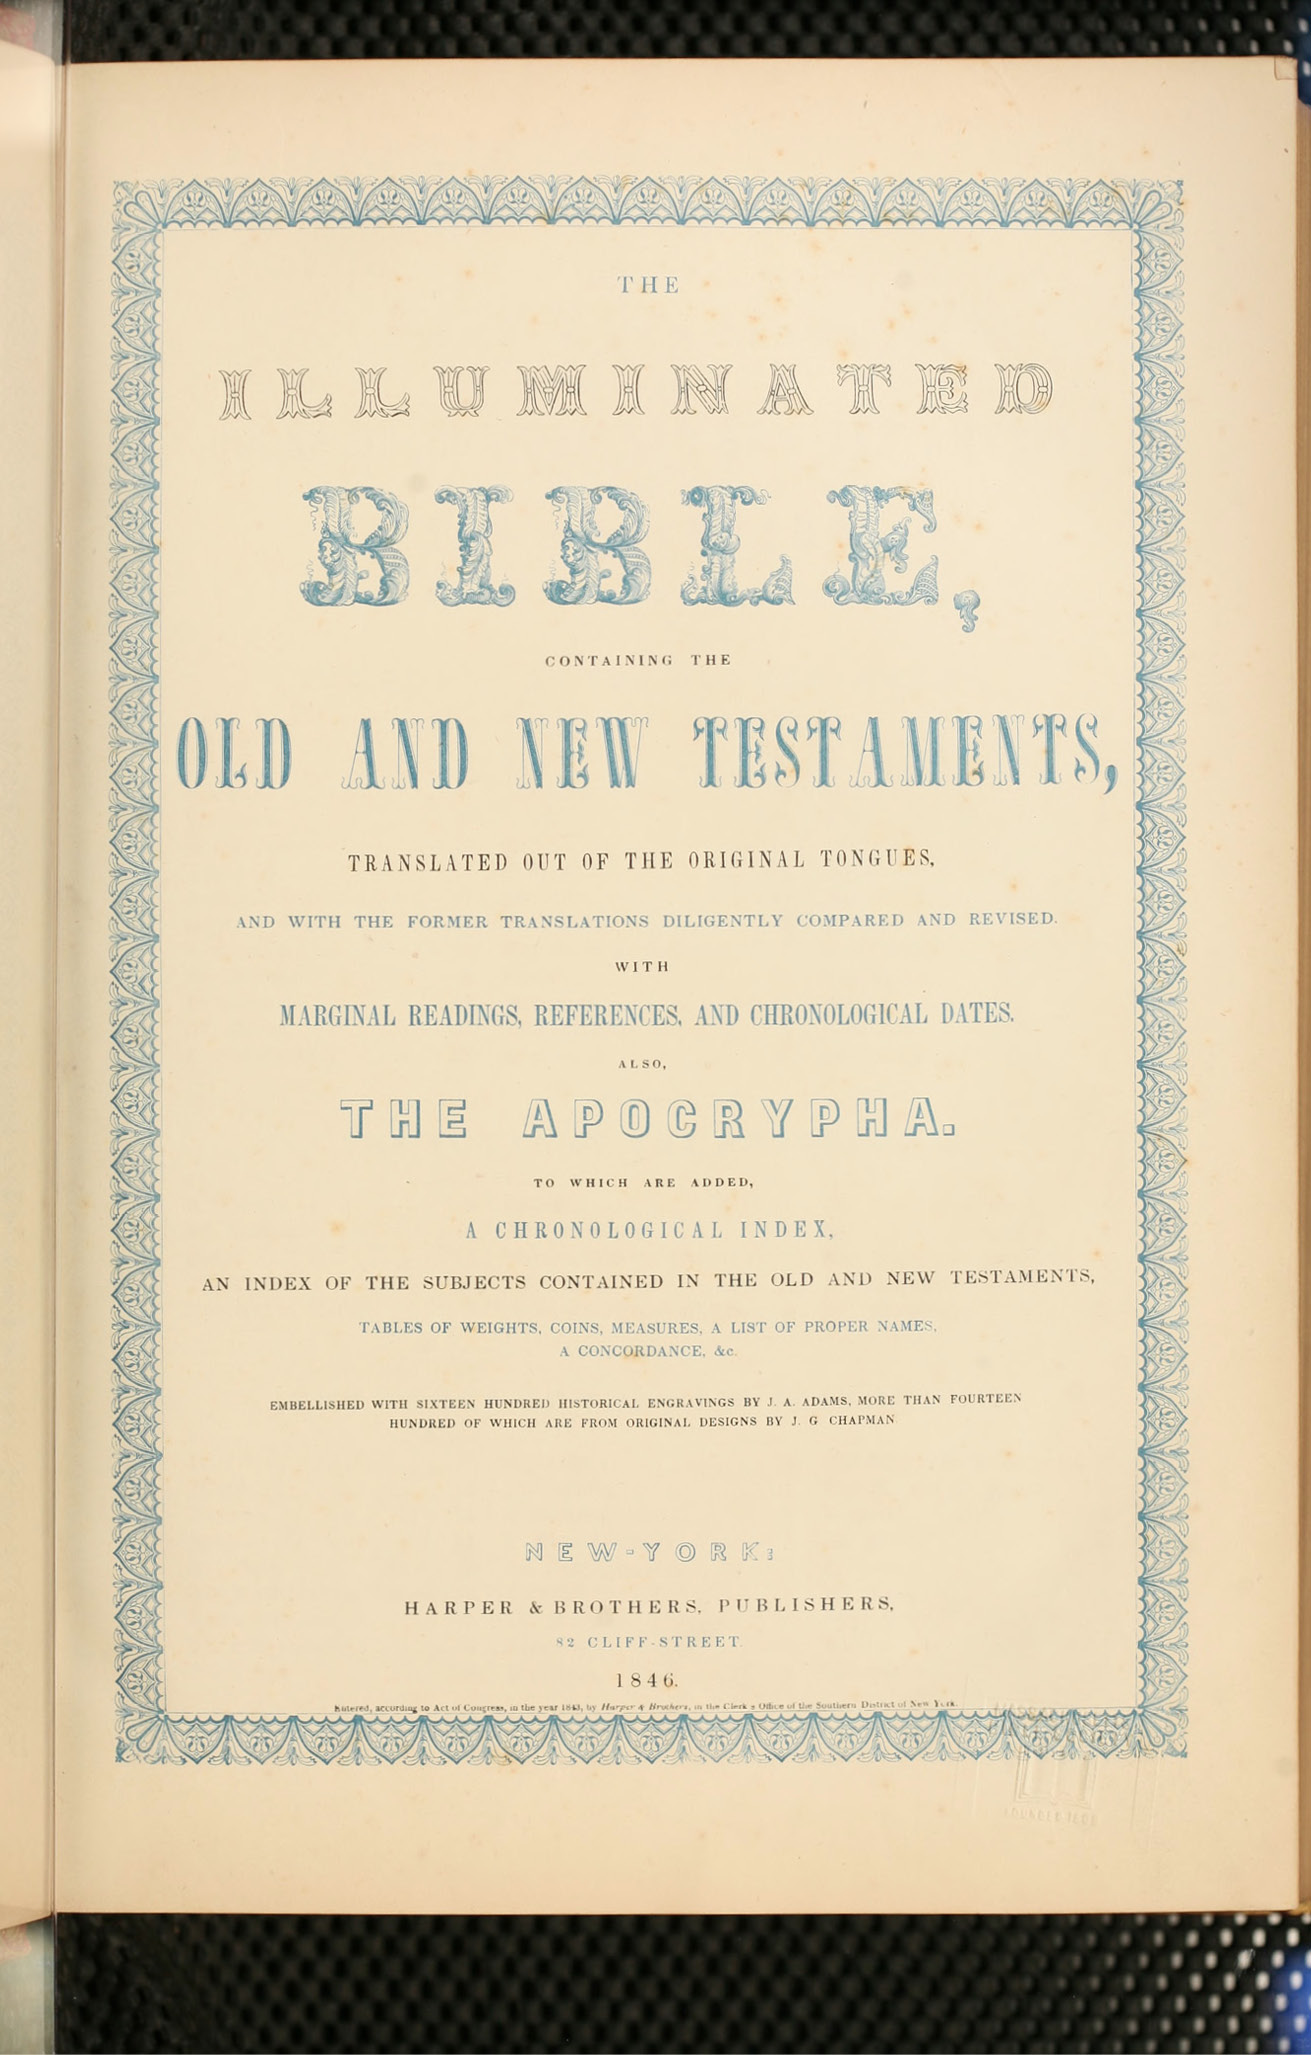 Title page of Harpers Illuminated Bible, with ornate lettering decorated in blue.